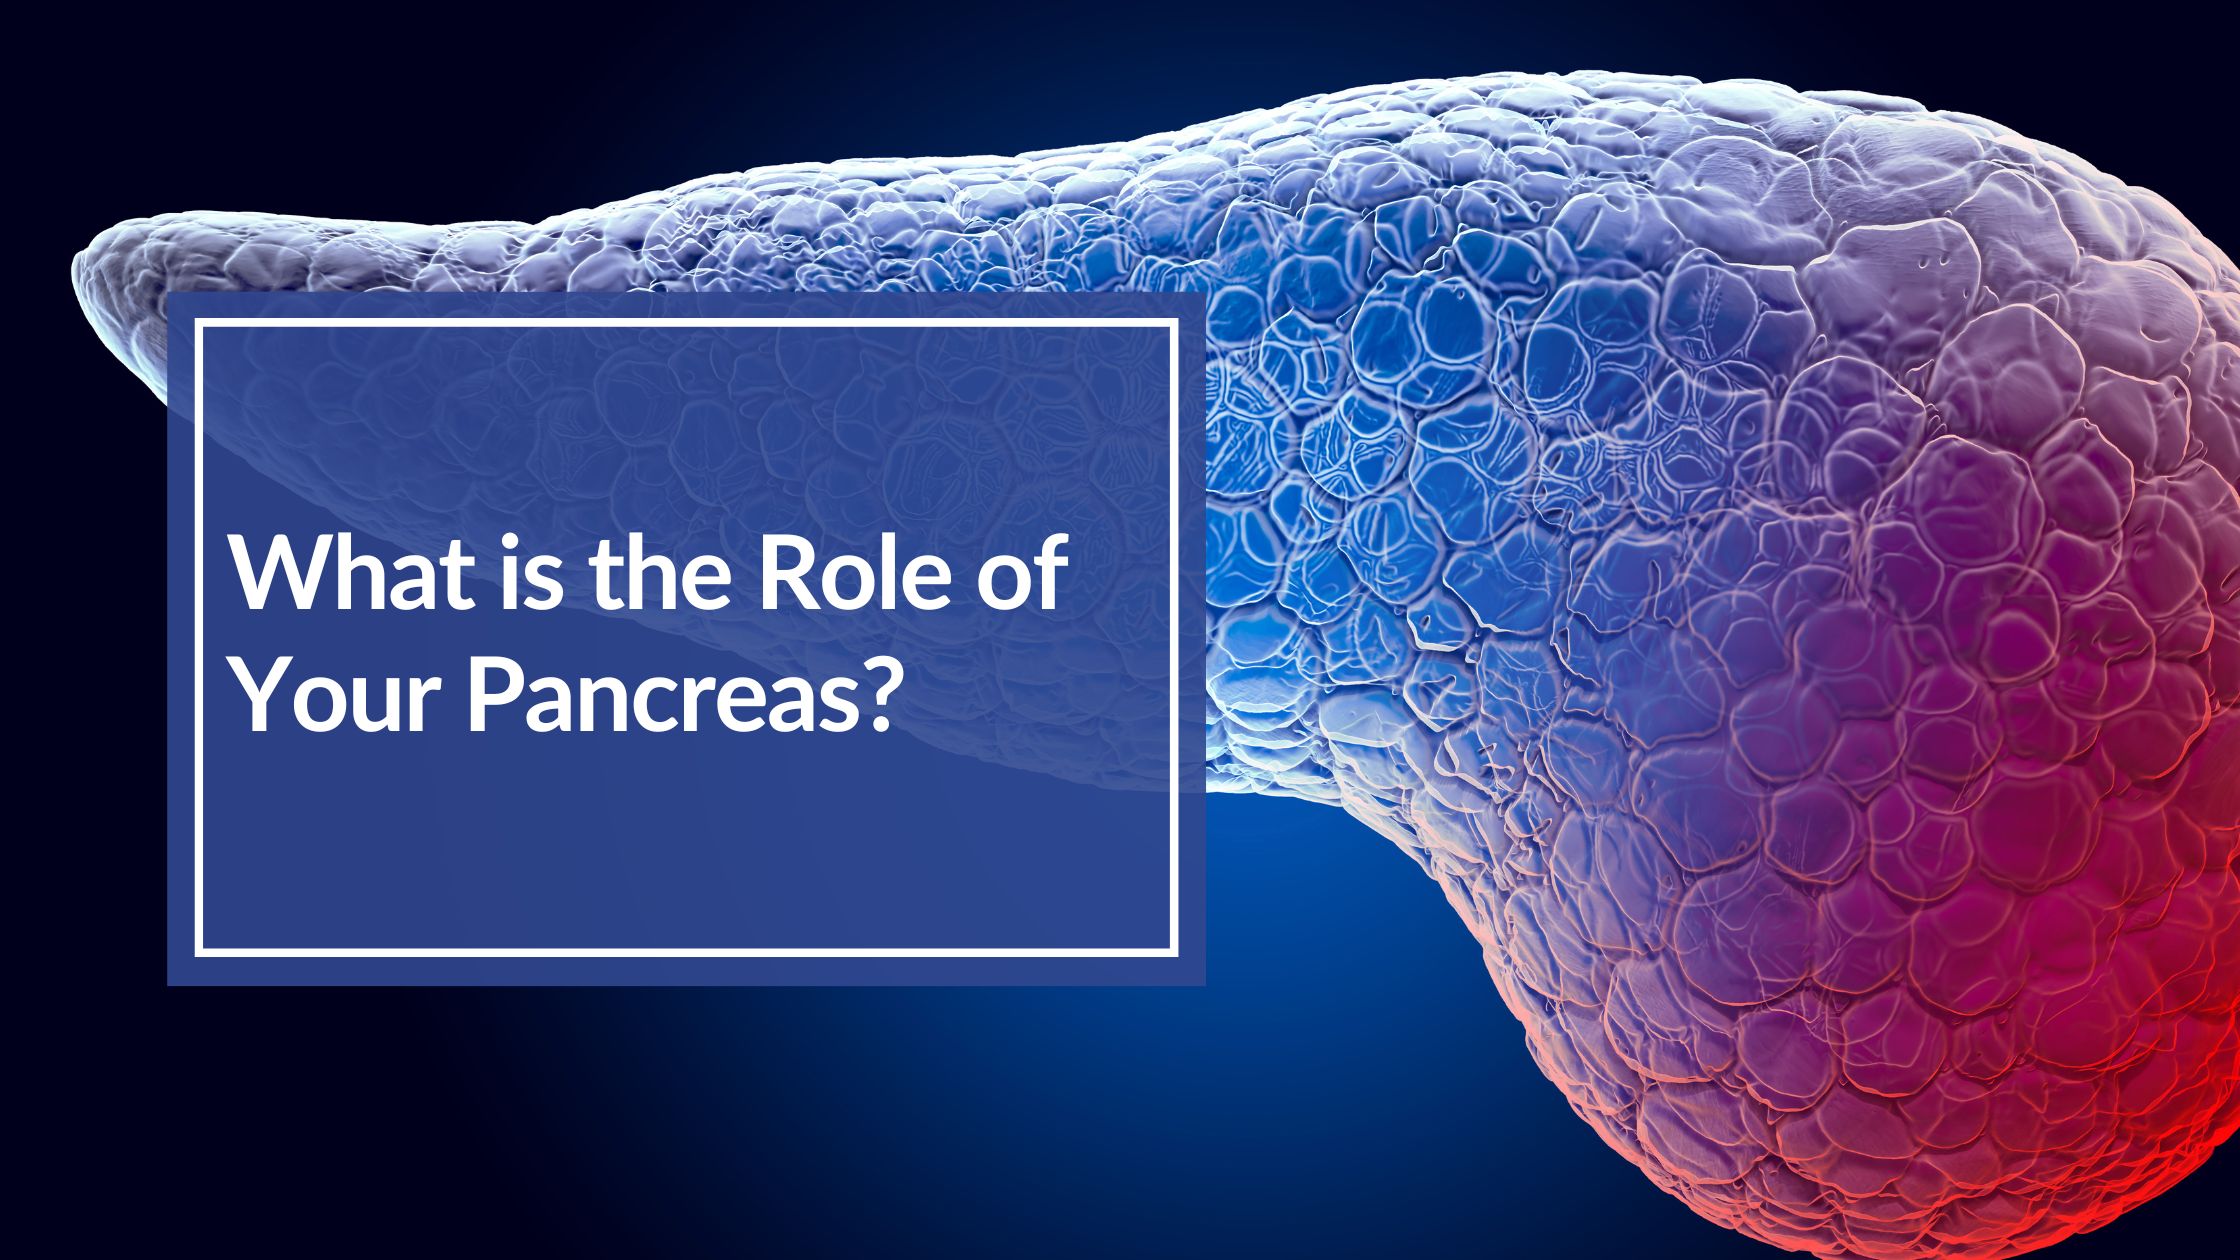 medical illustration showing a human pancreas as we understand the role of your pancreas